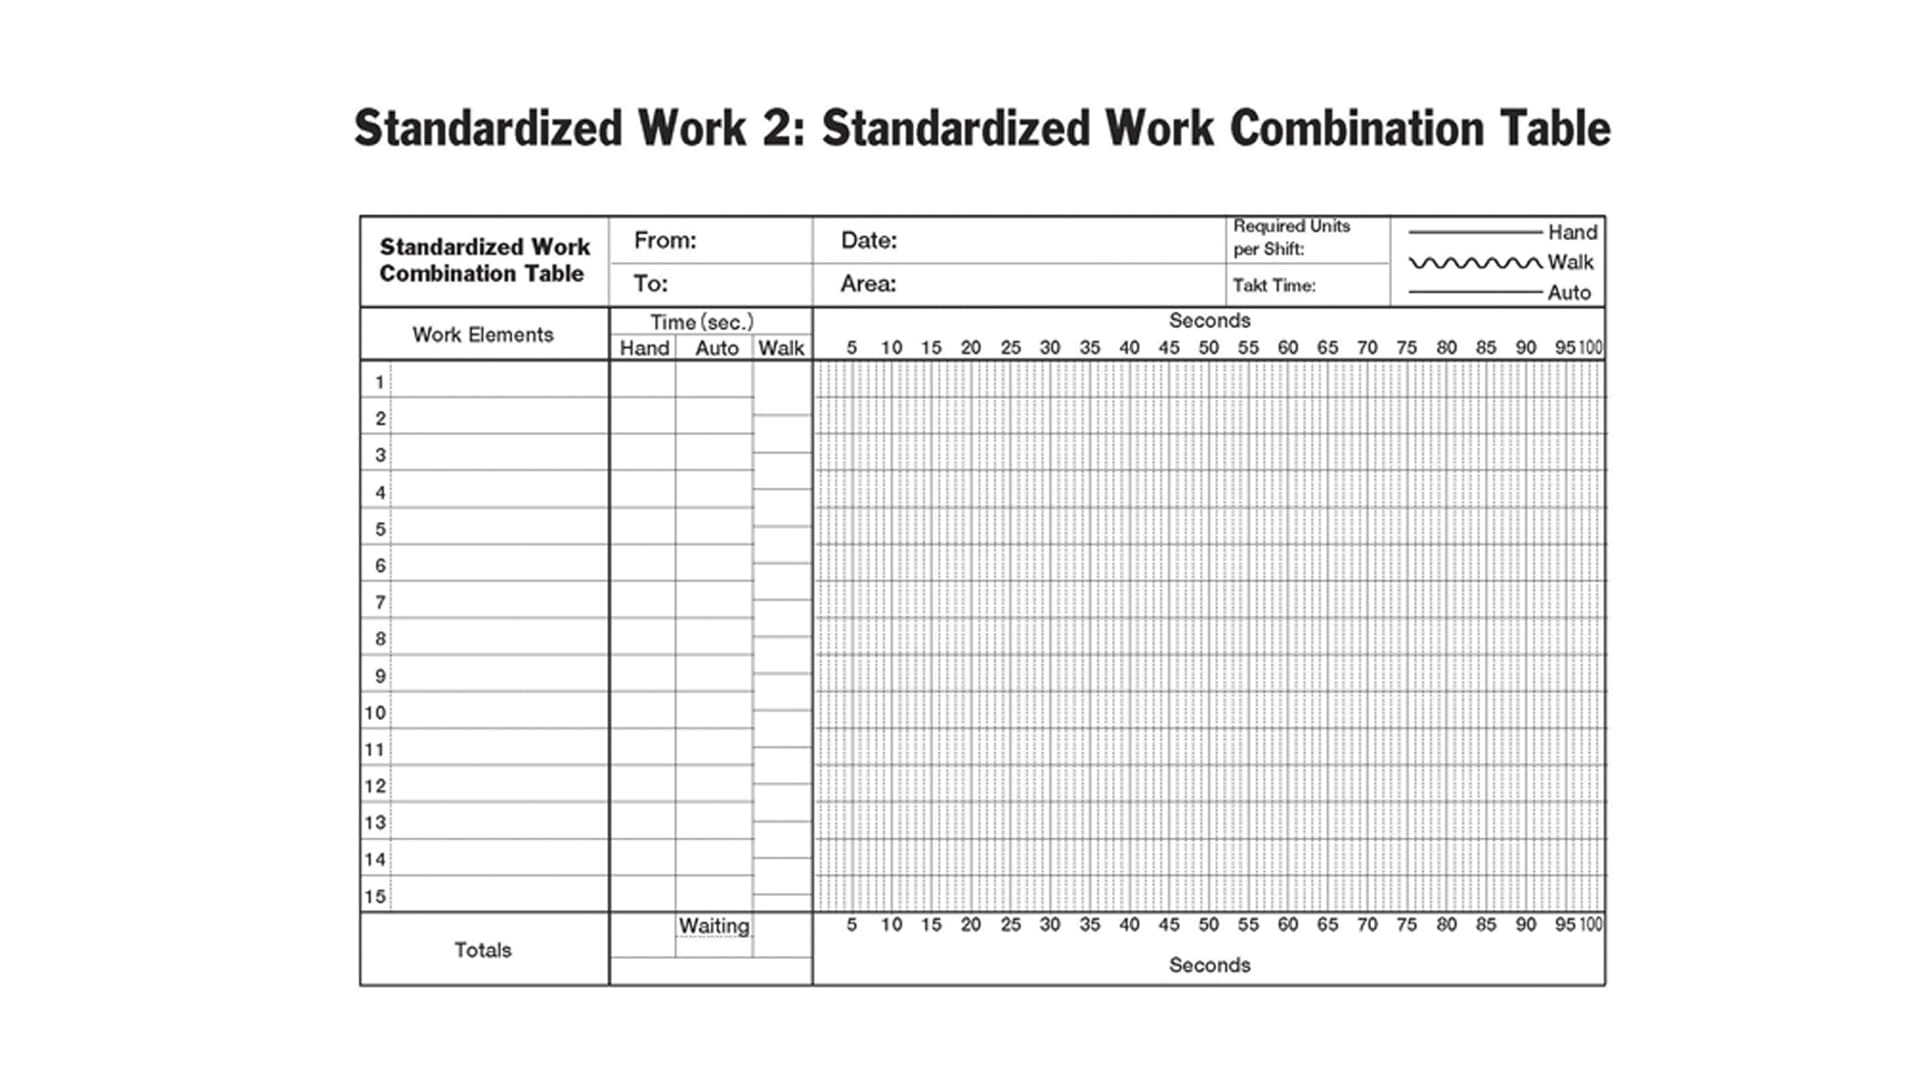 What is an example of LEAN standard work?